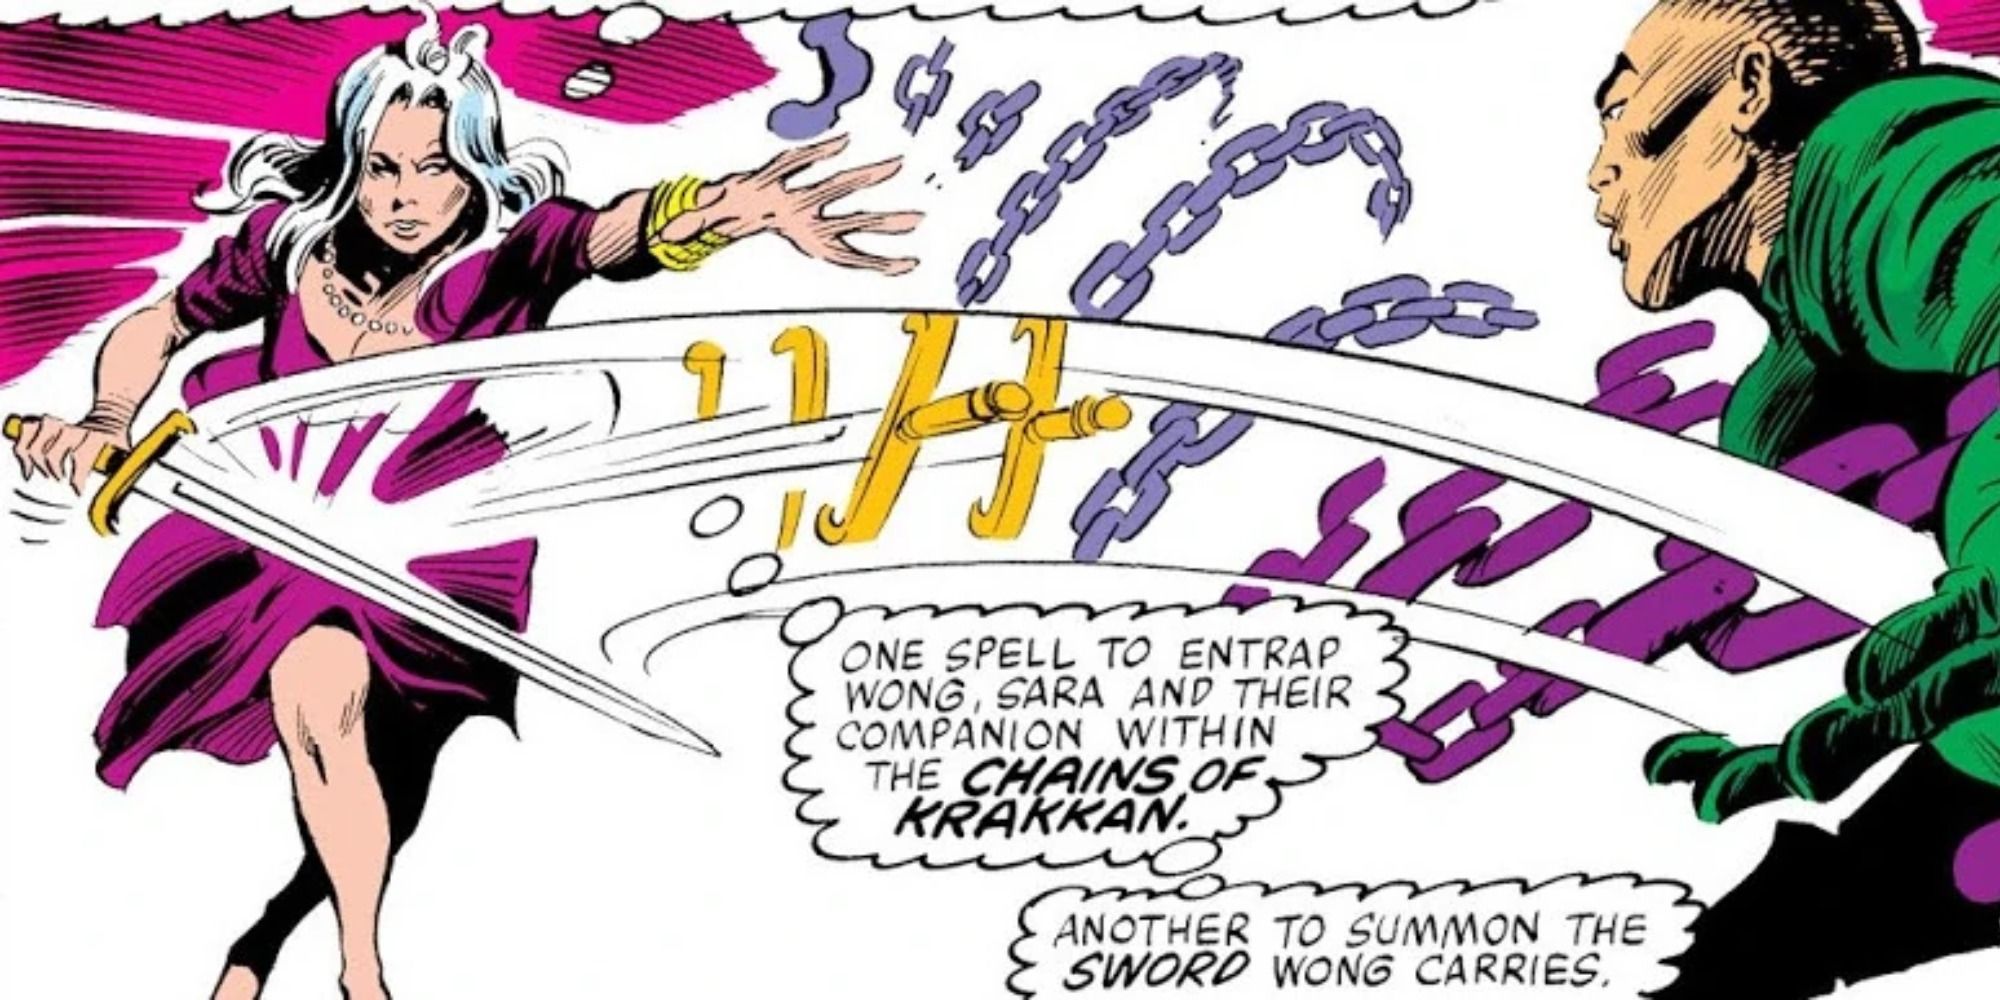 Clea uses The Chains of Krakkan in Marvel Comics.